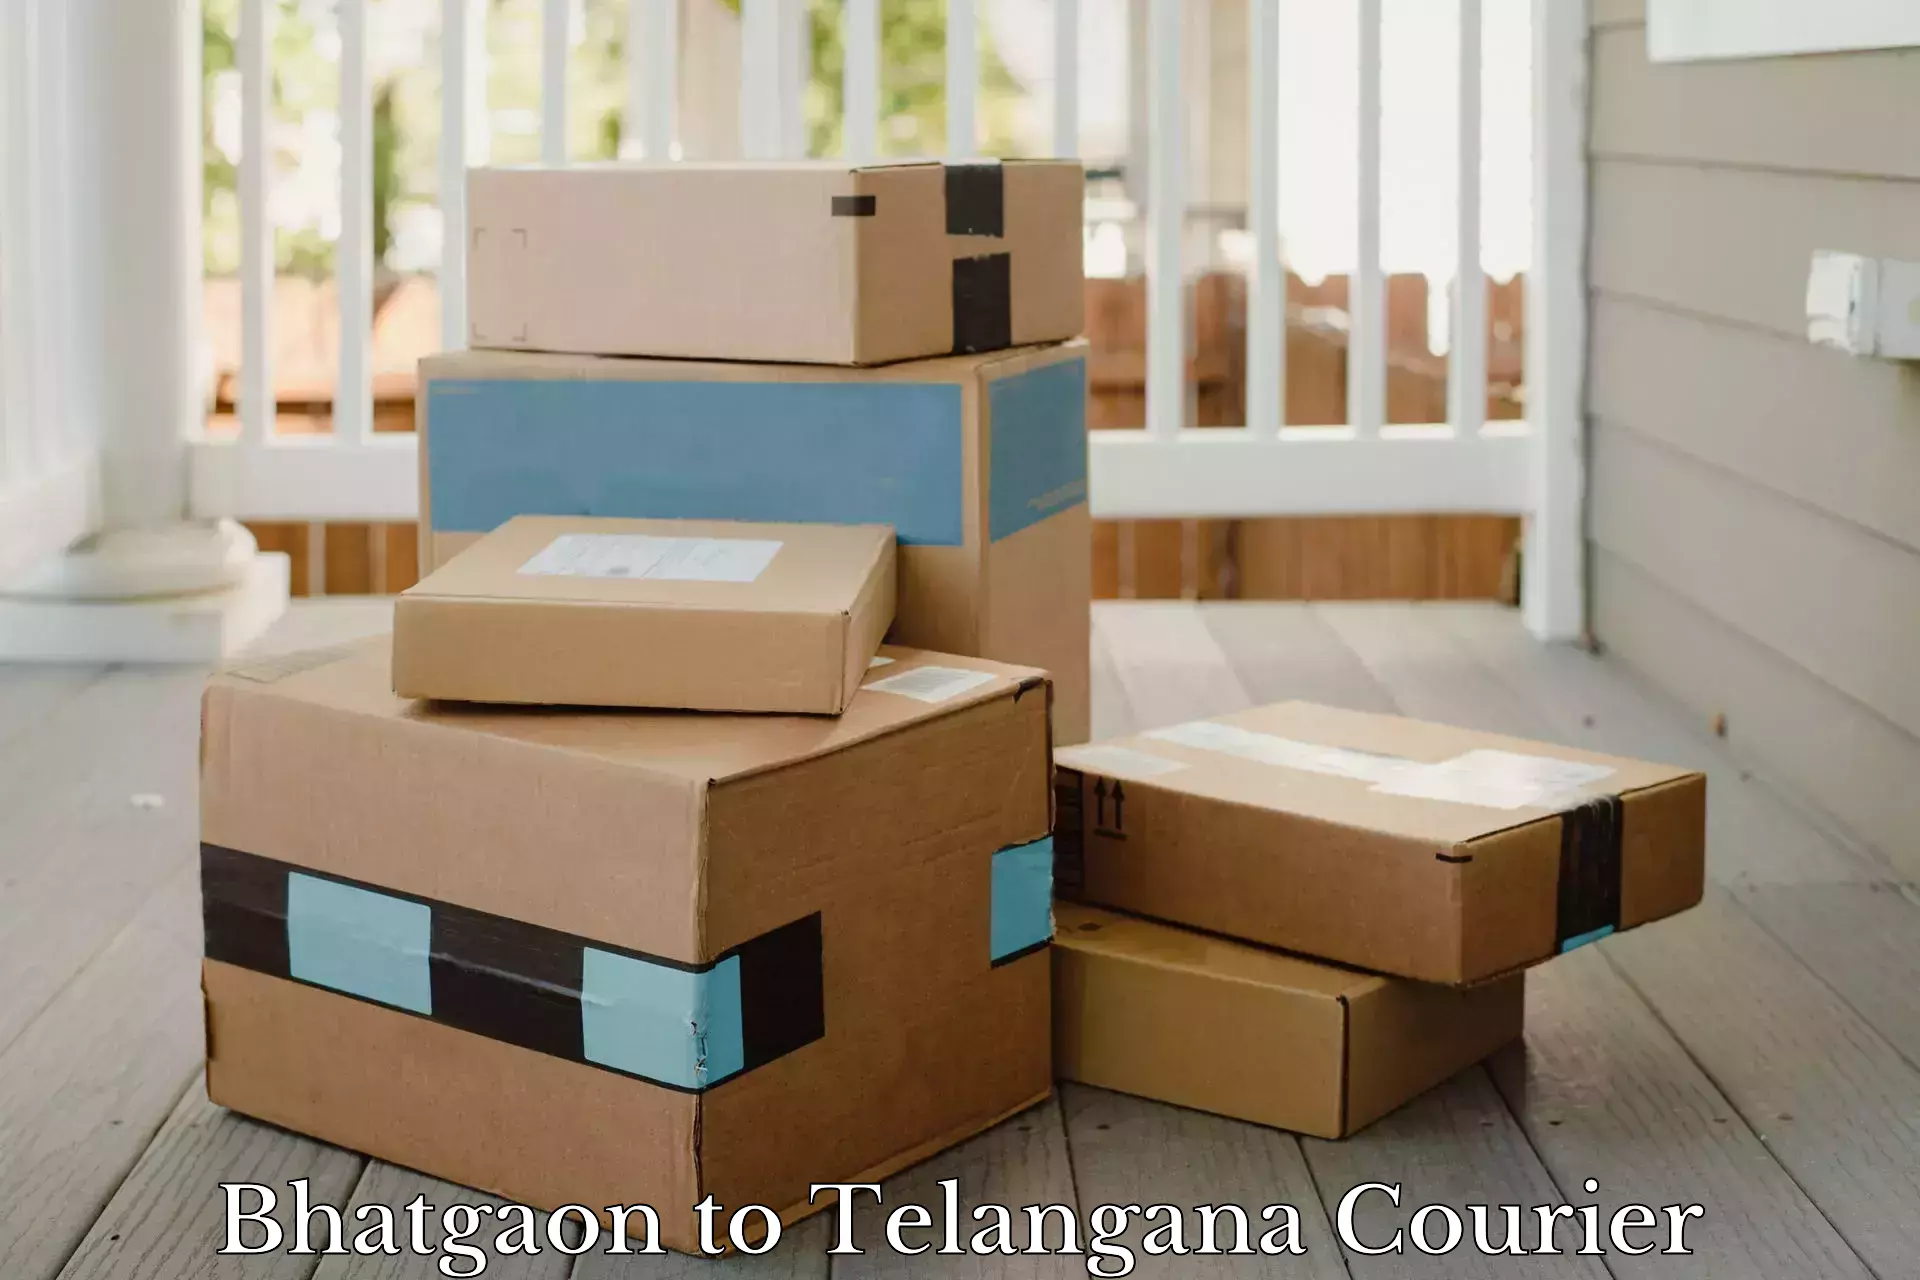 Quality courier services Bhatgaon to Netrang